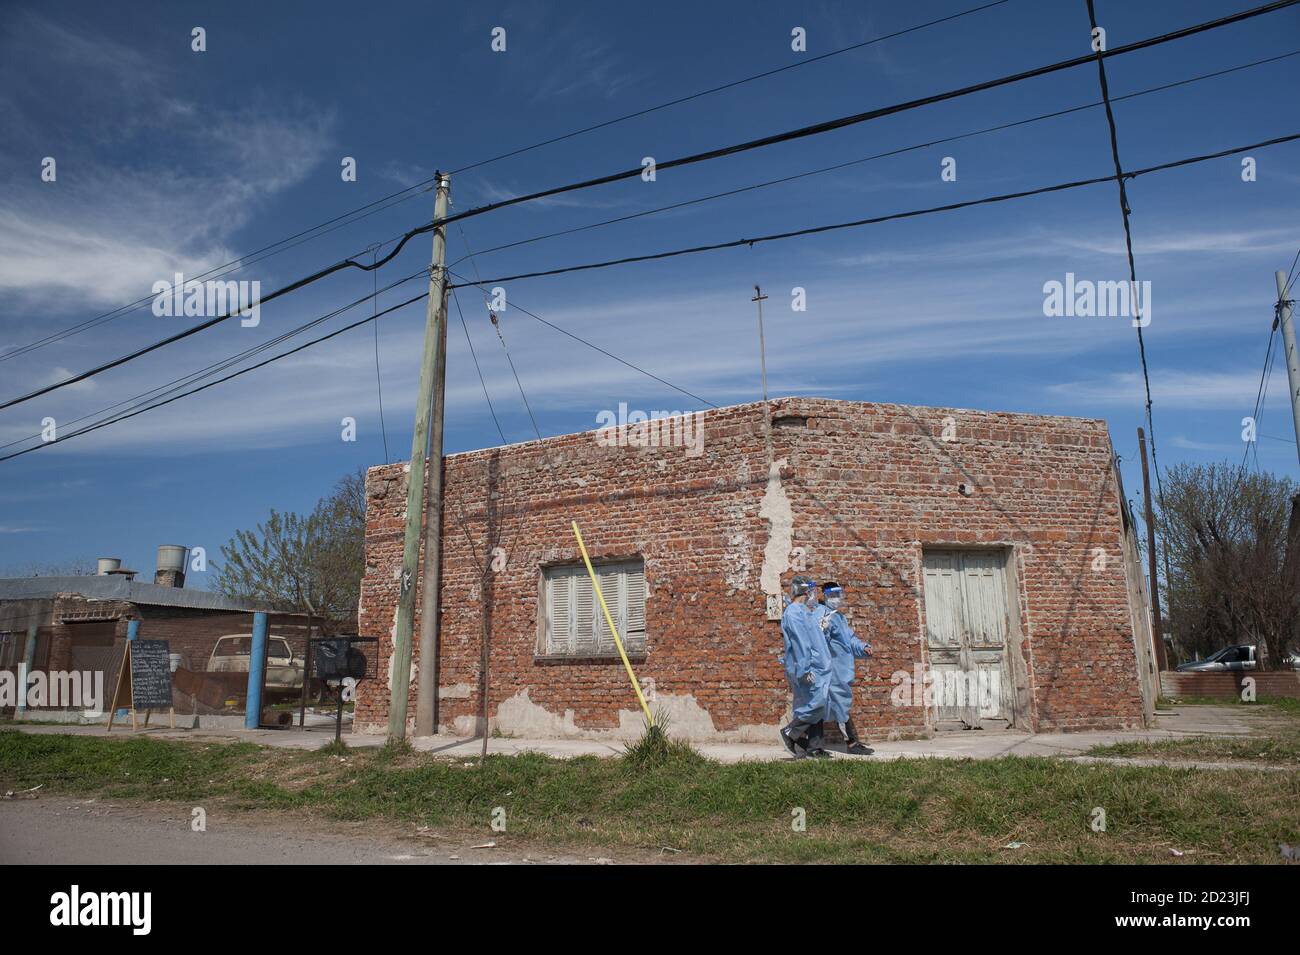 FIRMAT, ARGENTINA - Sep 17, 2020: Two volunteers walk house by house interviewing people to detect COVID-19 symptons and get them swabbed for confirma Stock Photo